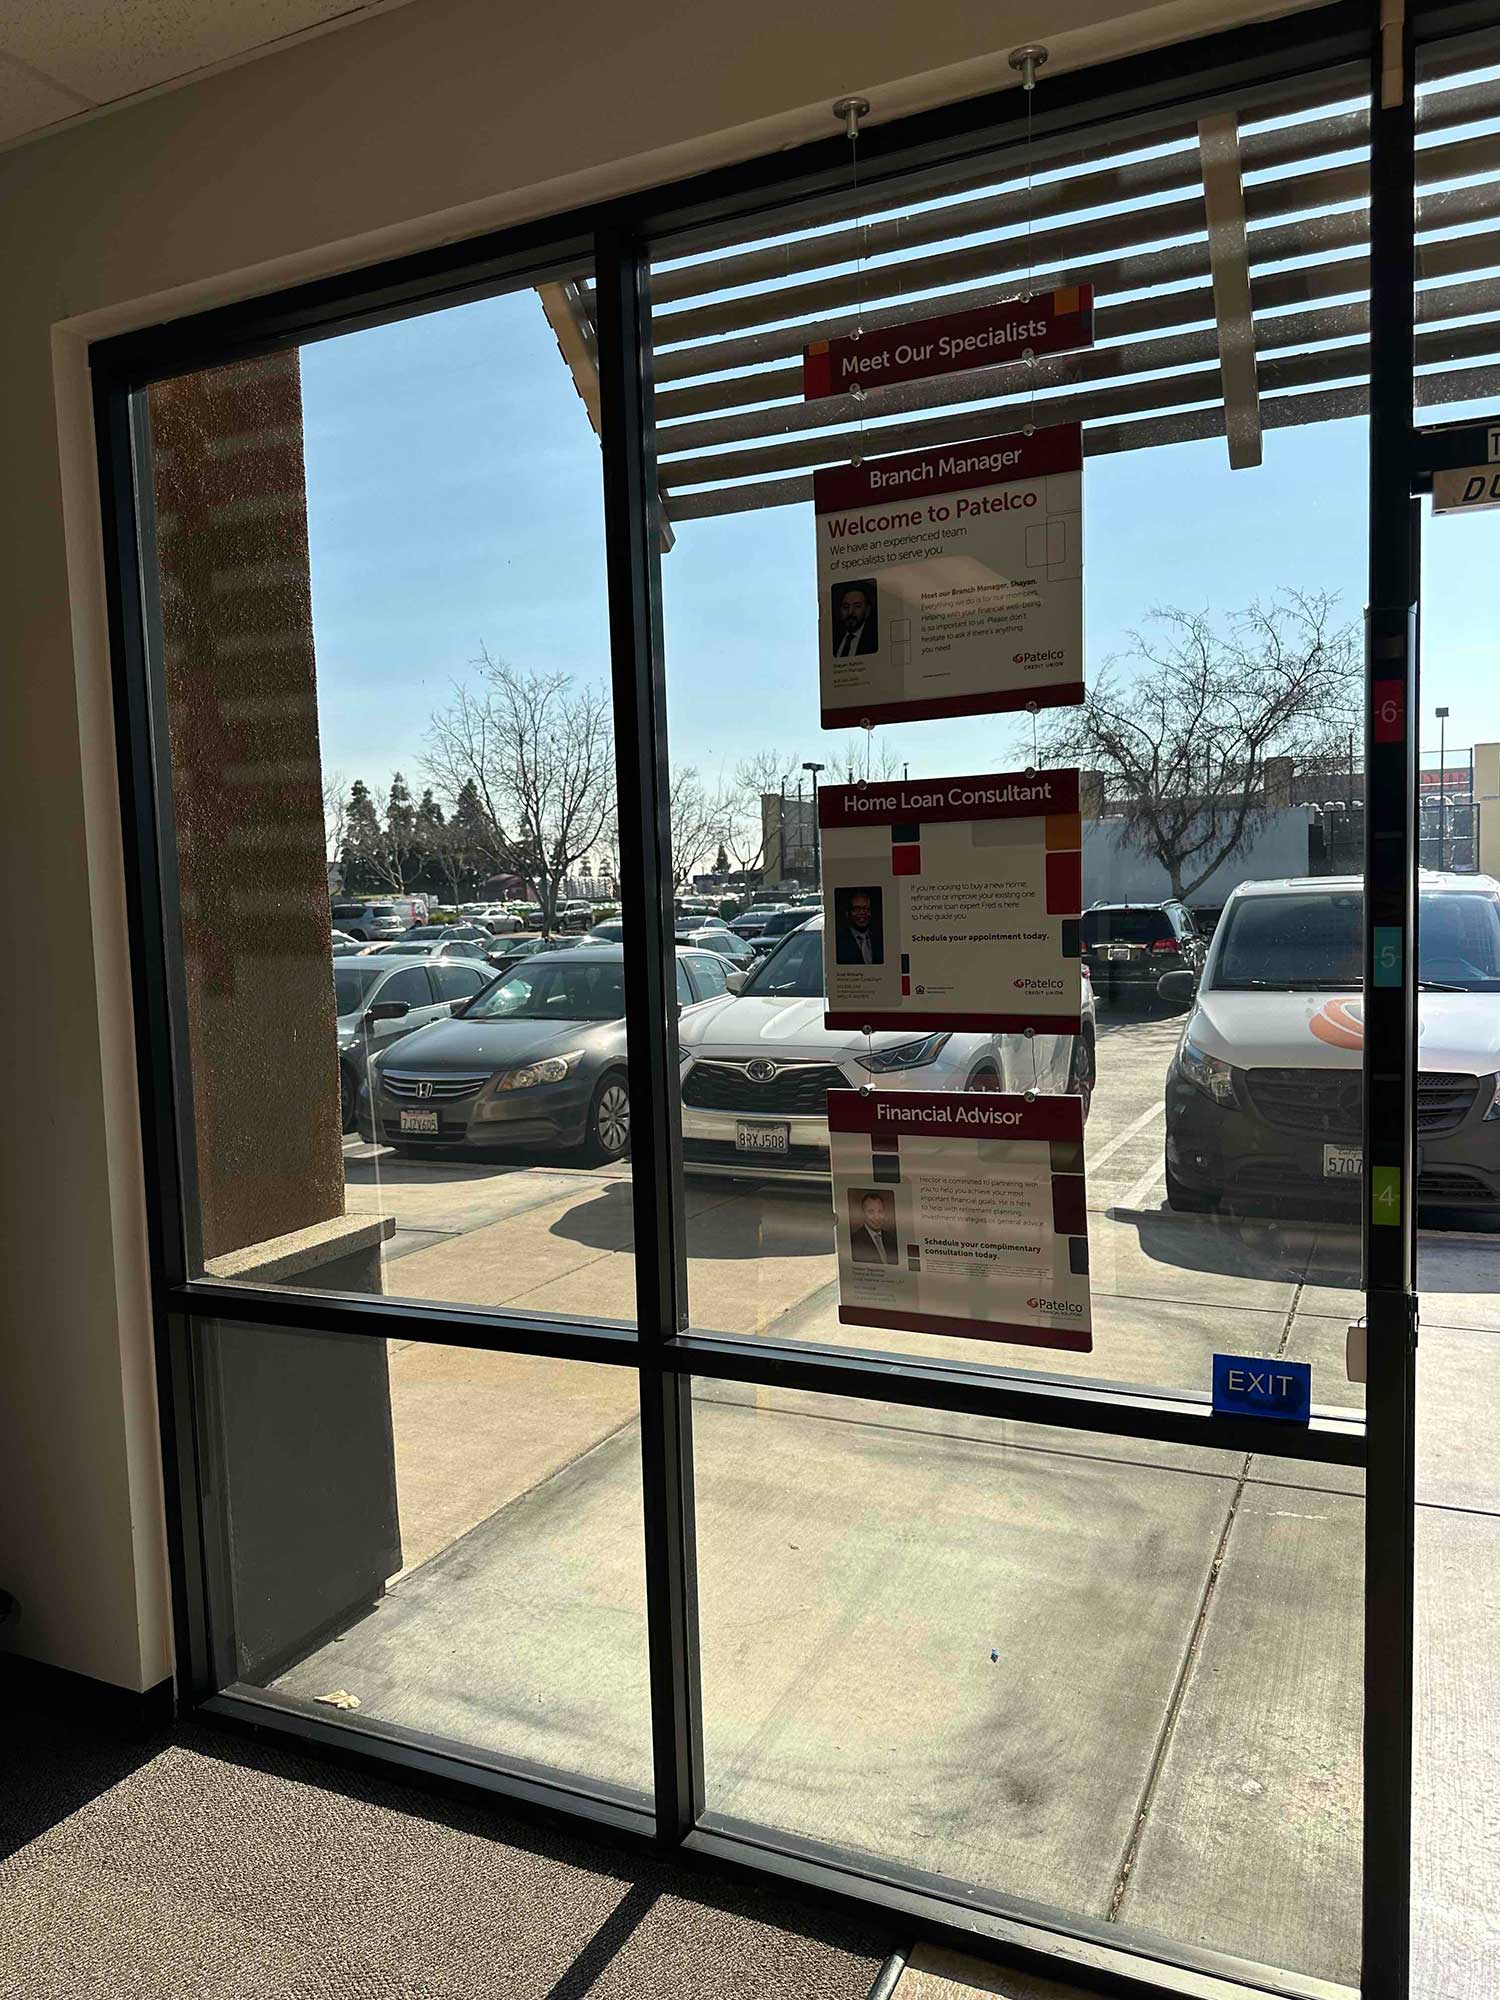 What window film can help with glare and heat control? 3M Night Vision can do it! Get a free estimate for your business today from ClimatePro.